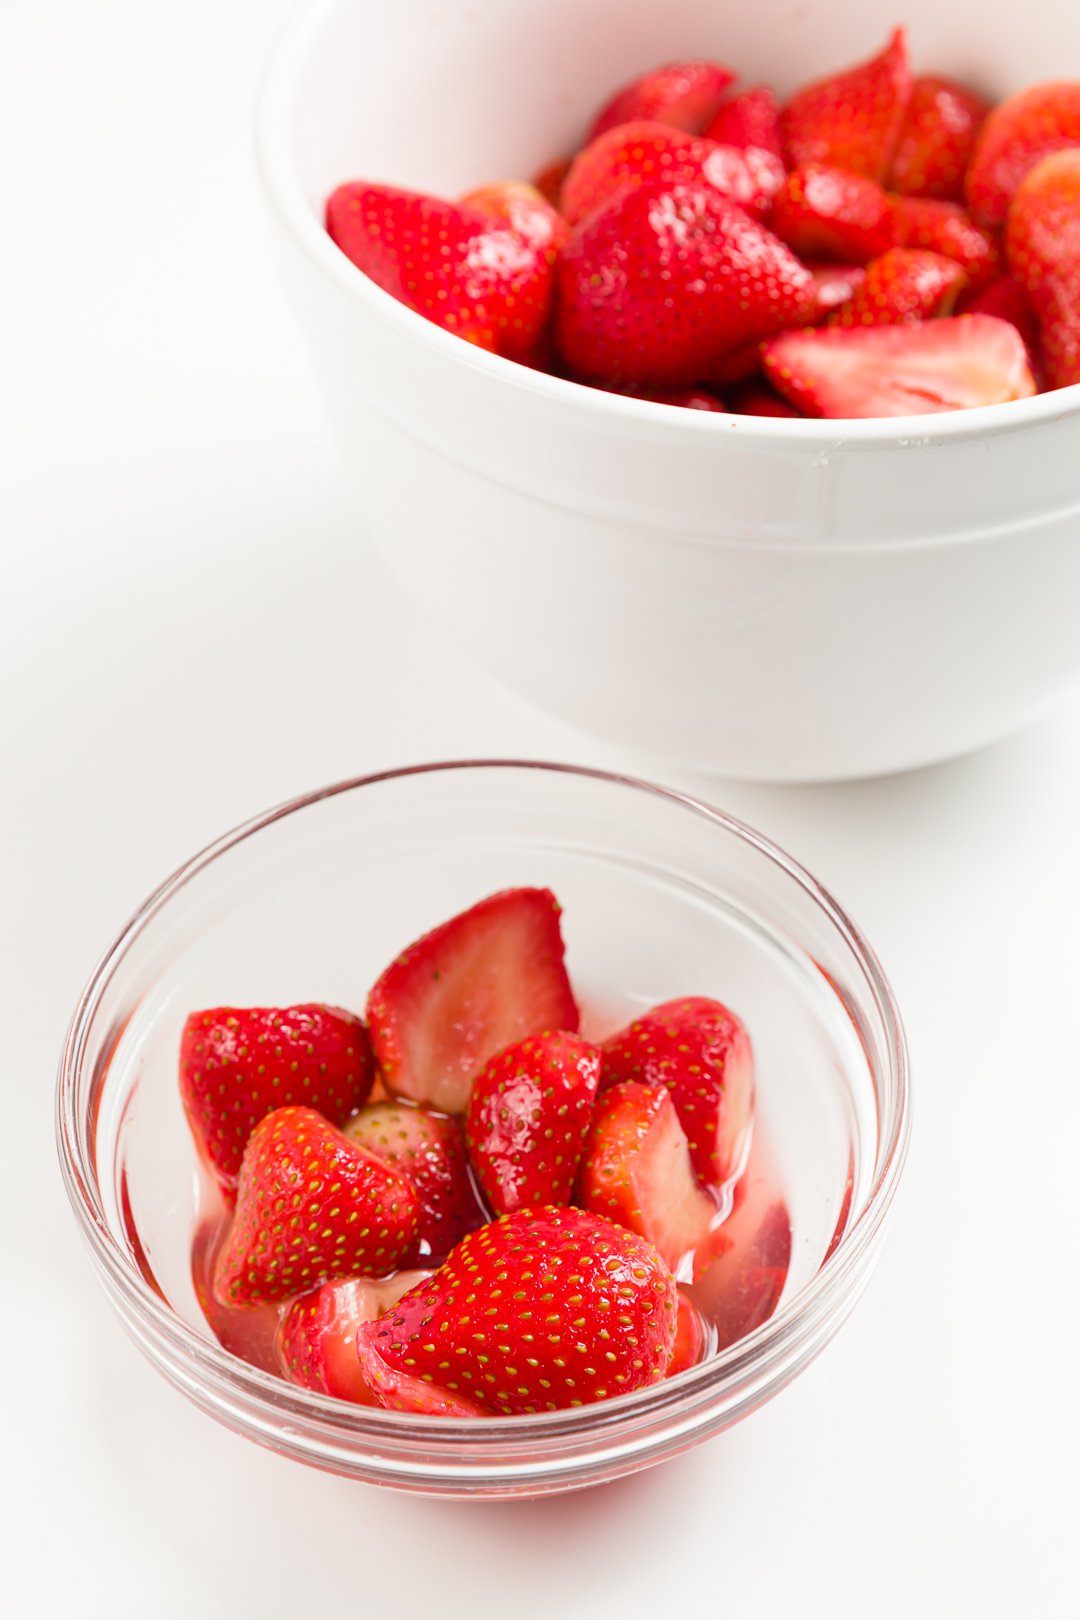 A small bowl of glistening macerated strawberries with a larger bowl full of strawberries in the background